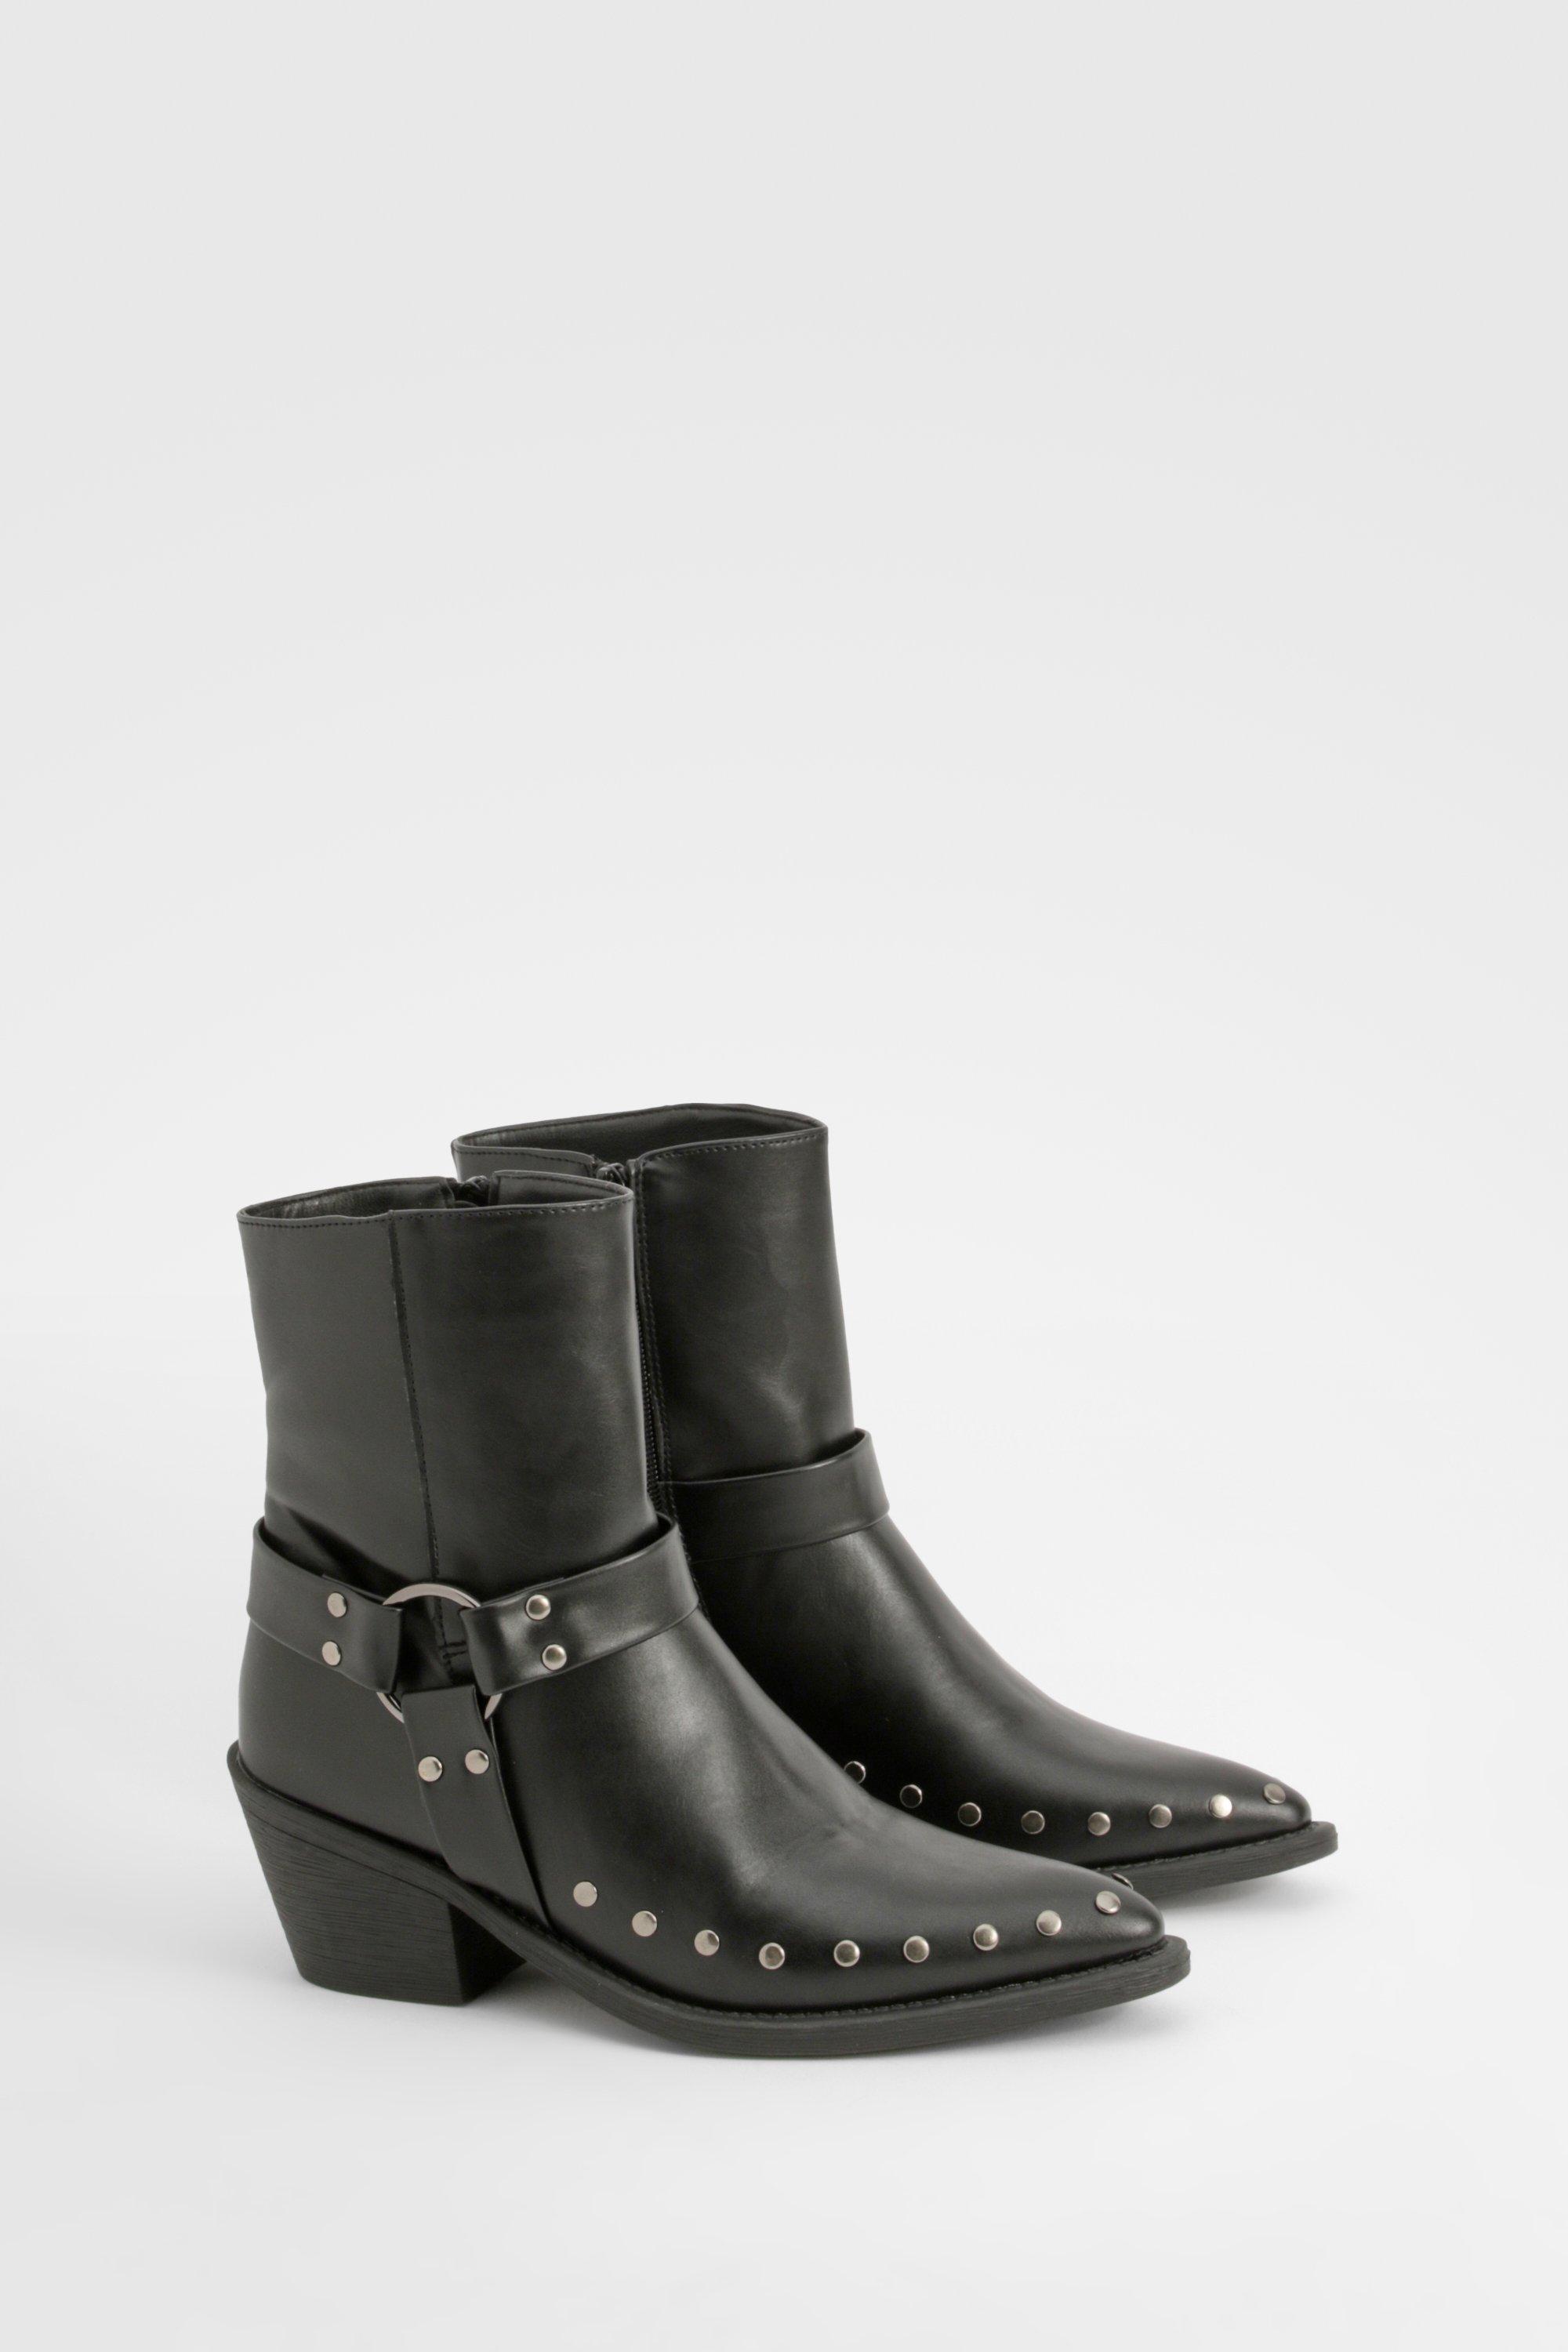 Image of Harness Stud Western Cowboy Boots, Nero